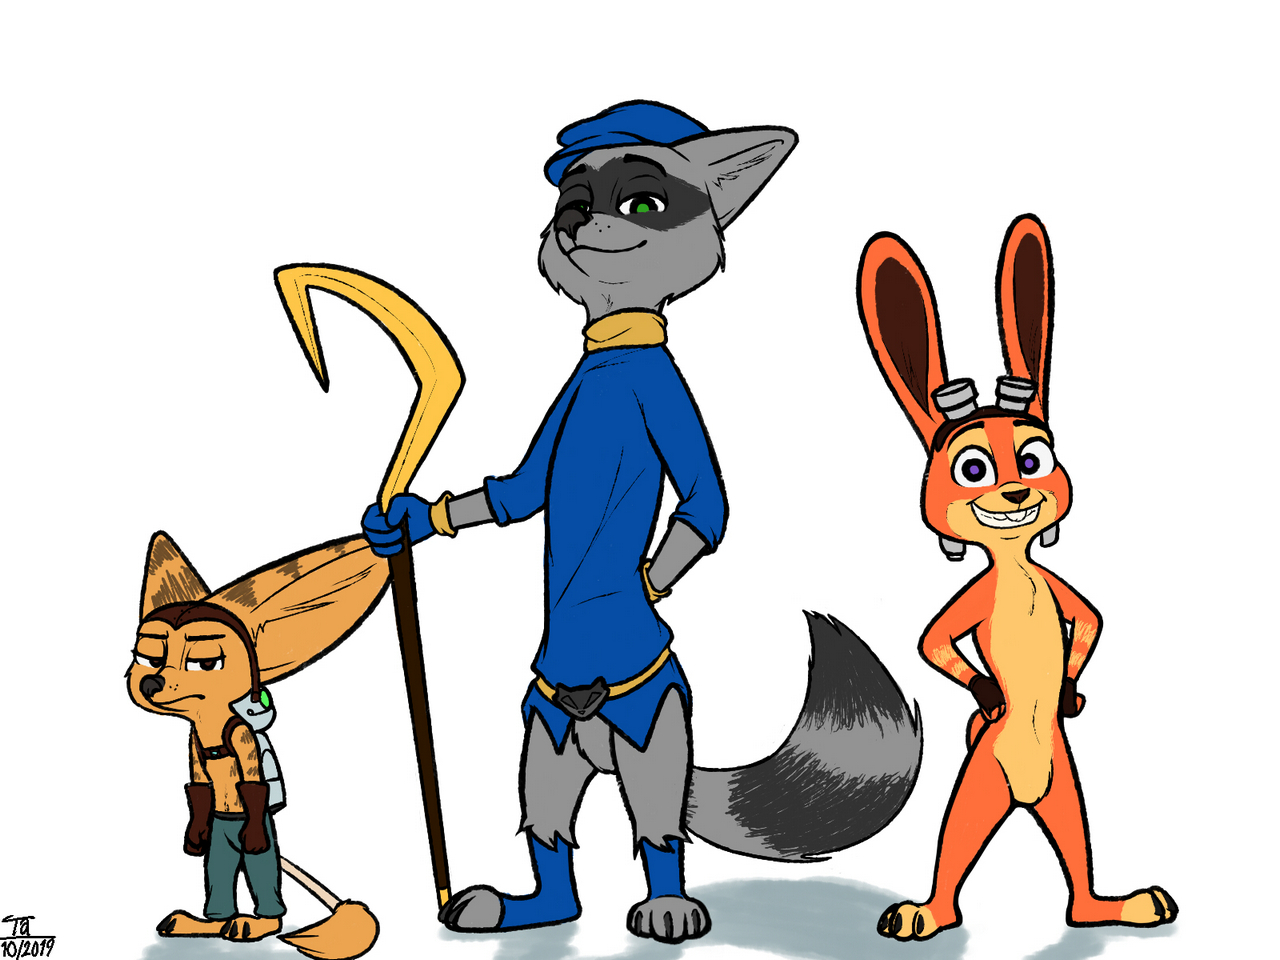 Clank Ratchet And Clank Daxter Finnick Judy Hopps Nick Wilde Ratchet Sly Cooper By Tangerine Artis